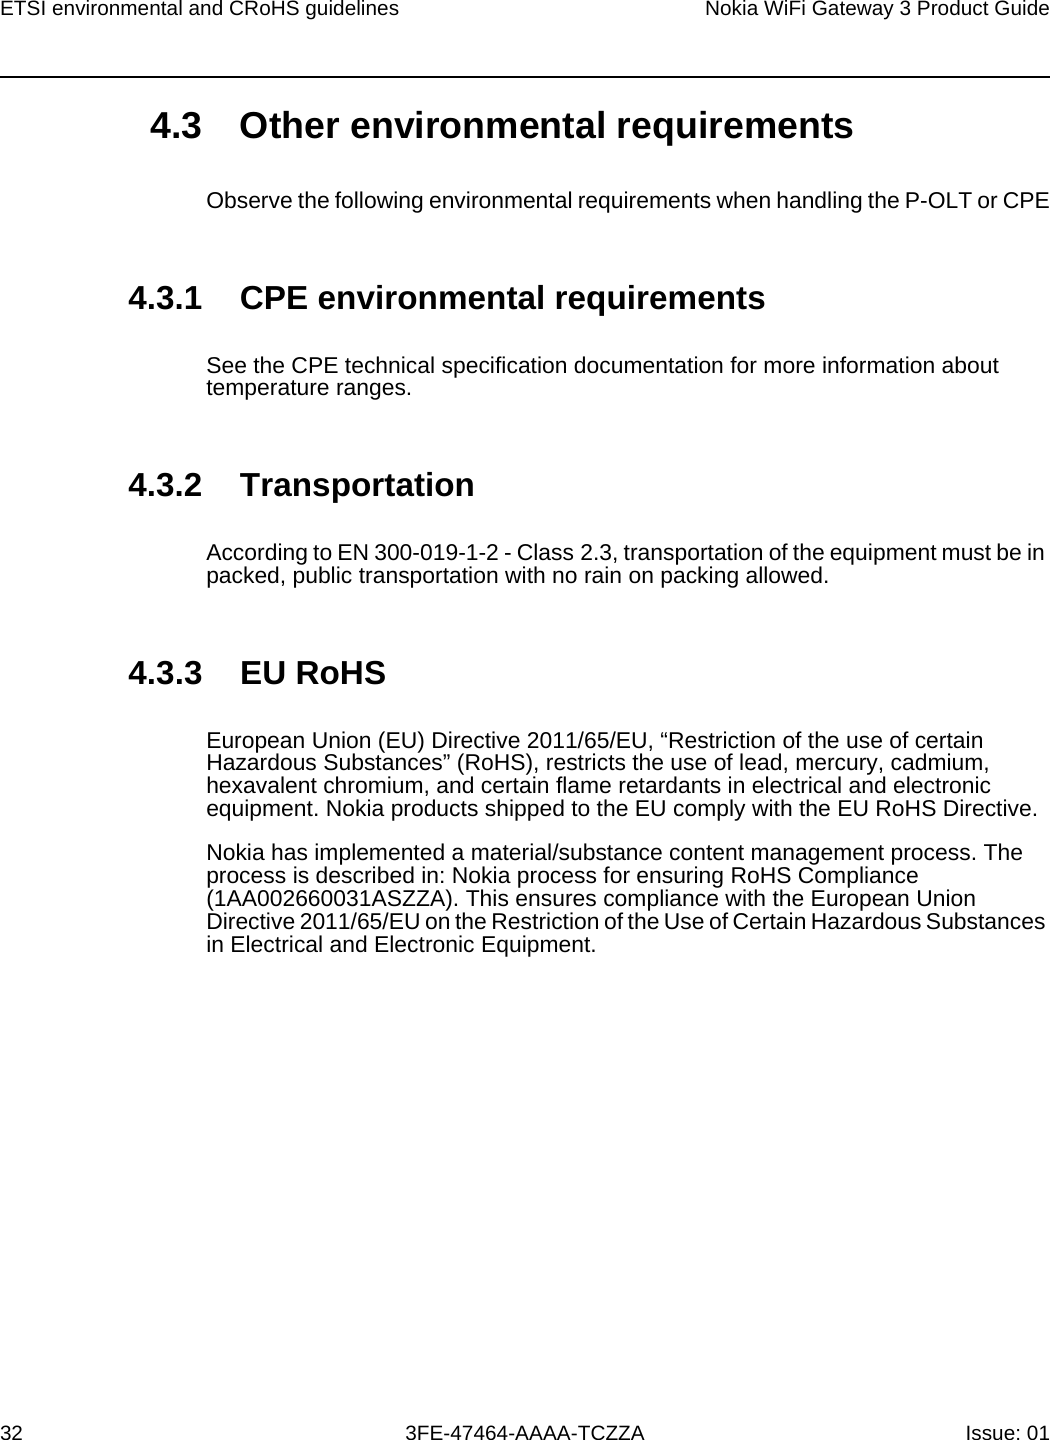 ETSI environmental and CRoHS guidelines32Nokia WiFi Gateway 3 Product Guide3FE-47464-AAAA-TCZZA Issue: 01 4.3 Other environmental requirementsObserve the following environmental requirements when handling the P-OLT or CPE4.3.1 CPE environmental requirementsSee the CPE technical specification documentation for more information about temperature ranges.4.3.2 TransportationAccording to EN 300-019-1-2 - Class 2.3, transportation of the equipment must be in packed, public transportation with no rain on packing allowed.4.3.3 EU RoHSEuropean Union (EU) Directive 2011/65/EU, “Restriction of the use of certain Hazardous Substances” (RoHS), restricts the use of lead, mercury, cadmium, hexavalent chromium, and certain flame retardants in electrical and electronic equipment. Nokia products shipped to the EU comply with the EU RoHS Directive.Nokia has implemented a material/substance content management process. The process is described in: Nokia process for ensuring RoHS Compliance (1AA002660031ASZZA). This ensures compliance with the European Union Directive 2011/65/EU on the Restriction of the Use of Certain Hazardous Substances in Electrical and Electronic Equipment. 